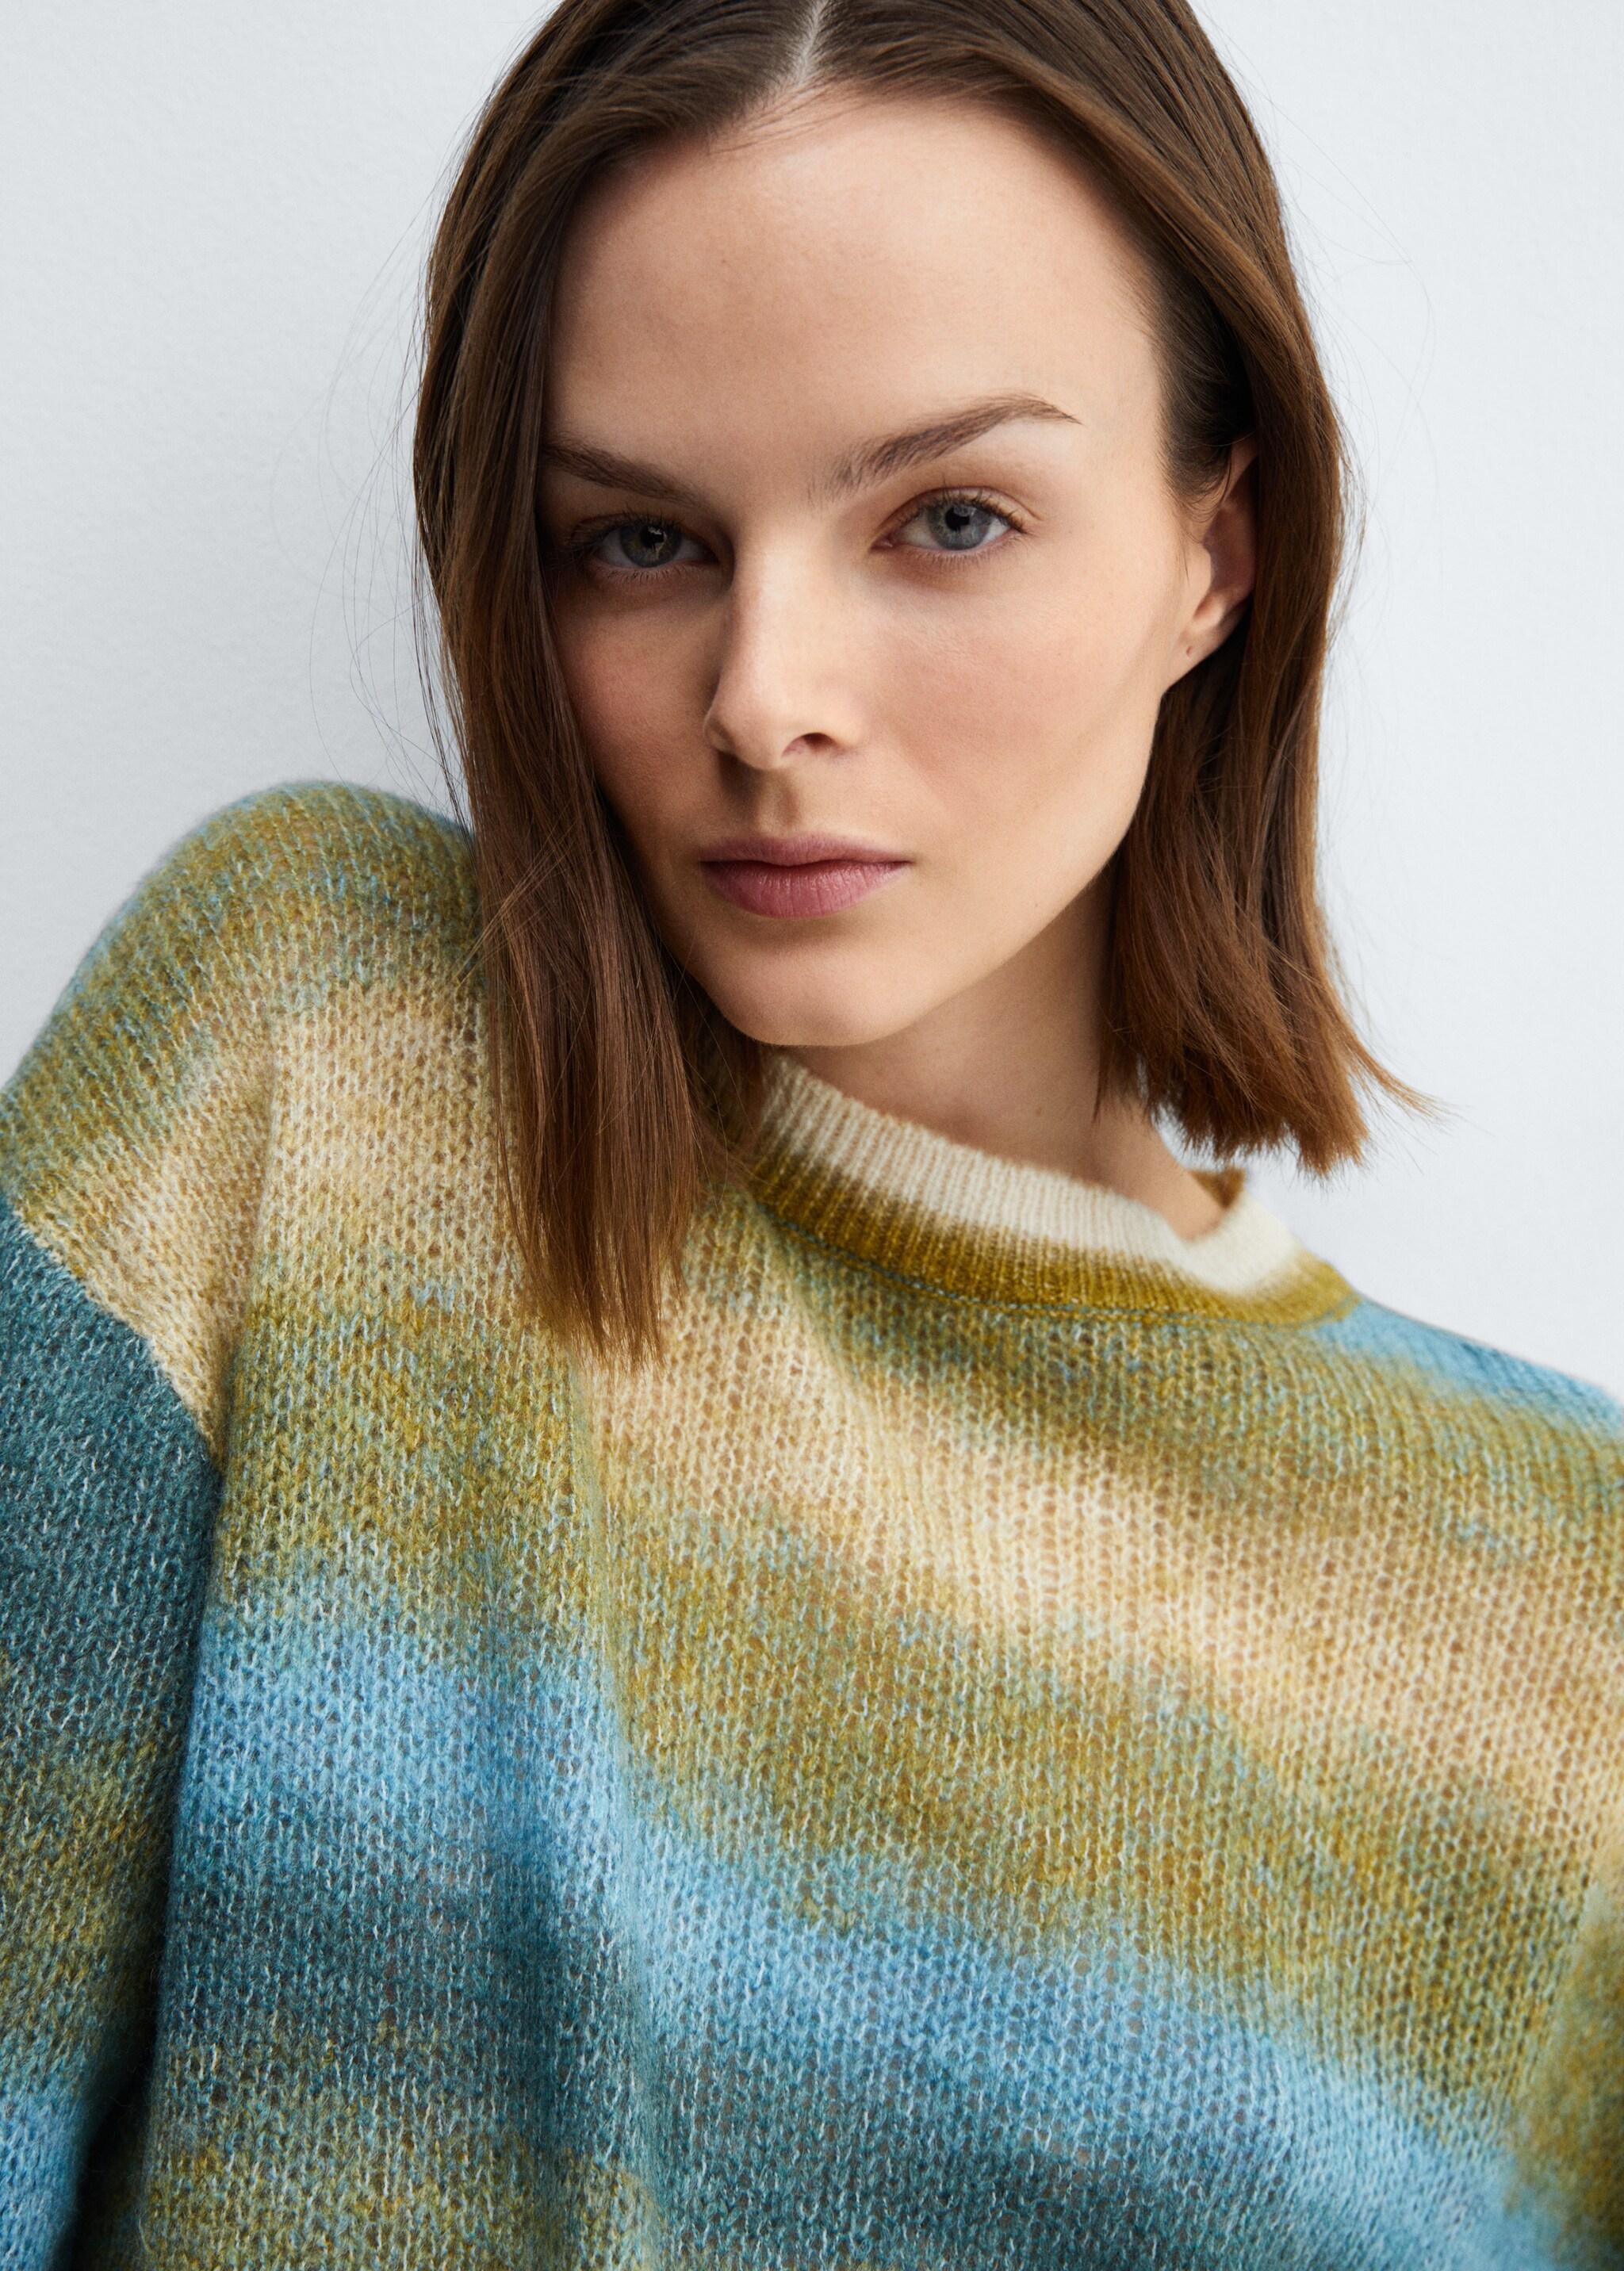 Degraded knitted sweater - Details of the article 1